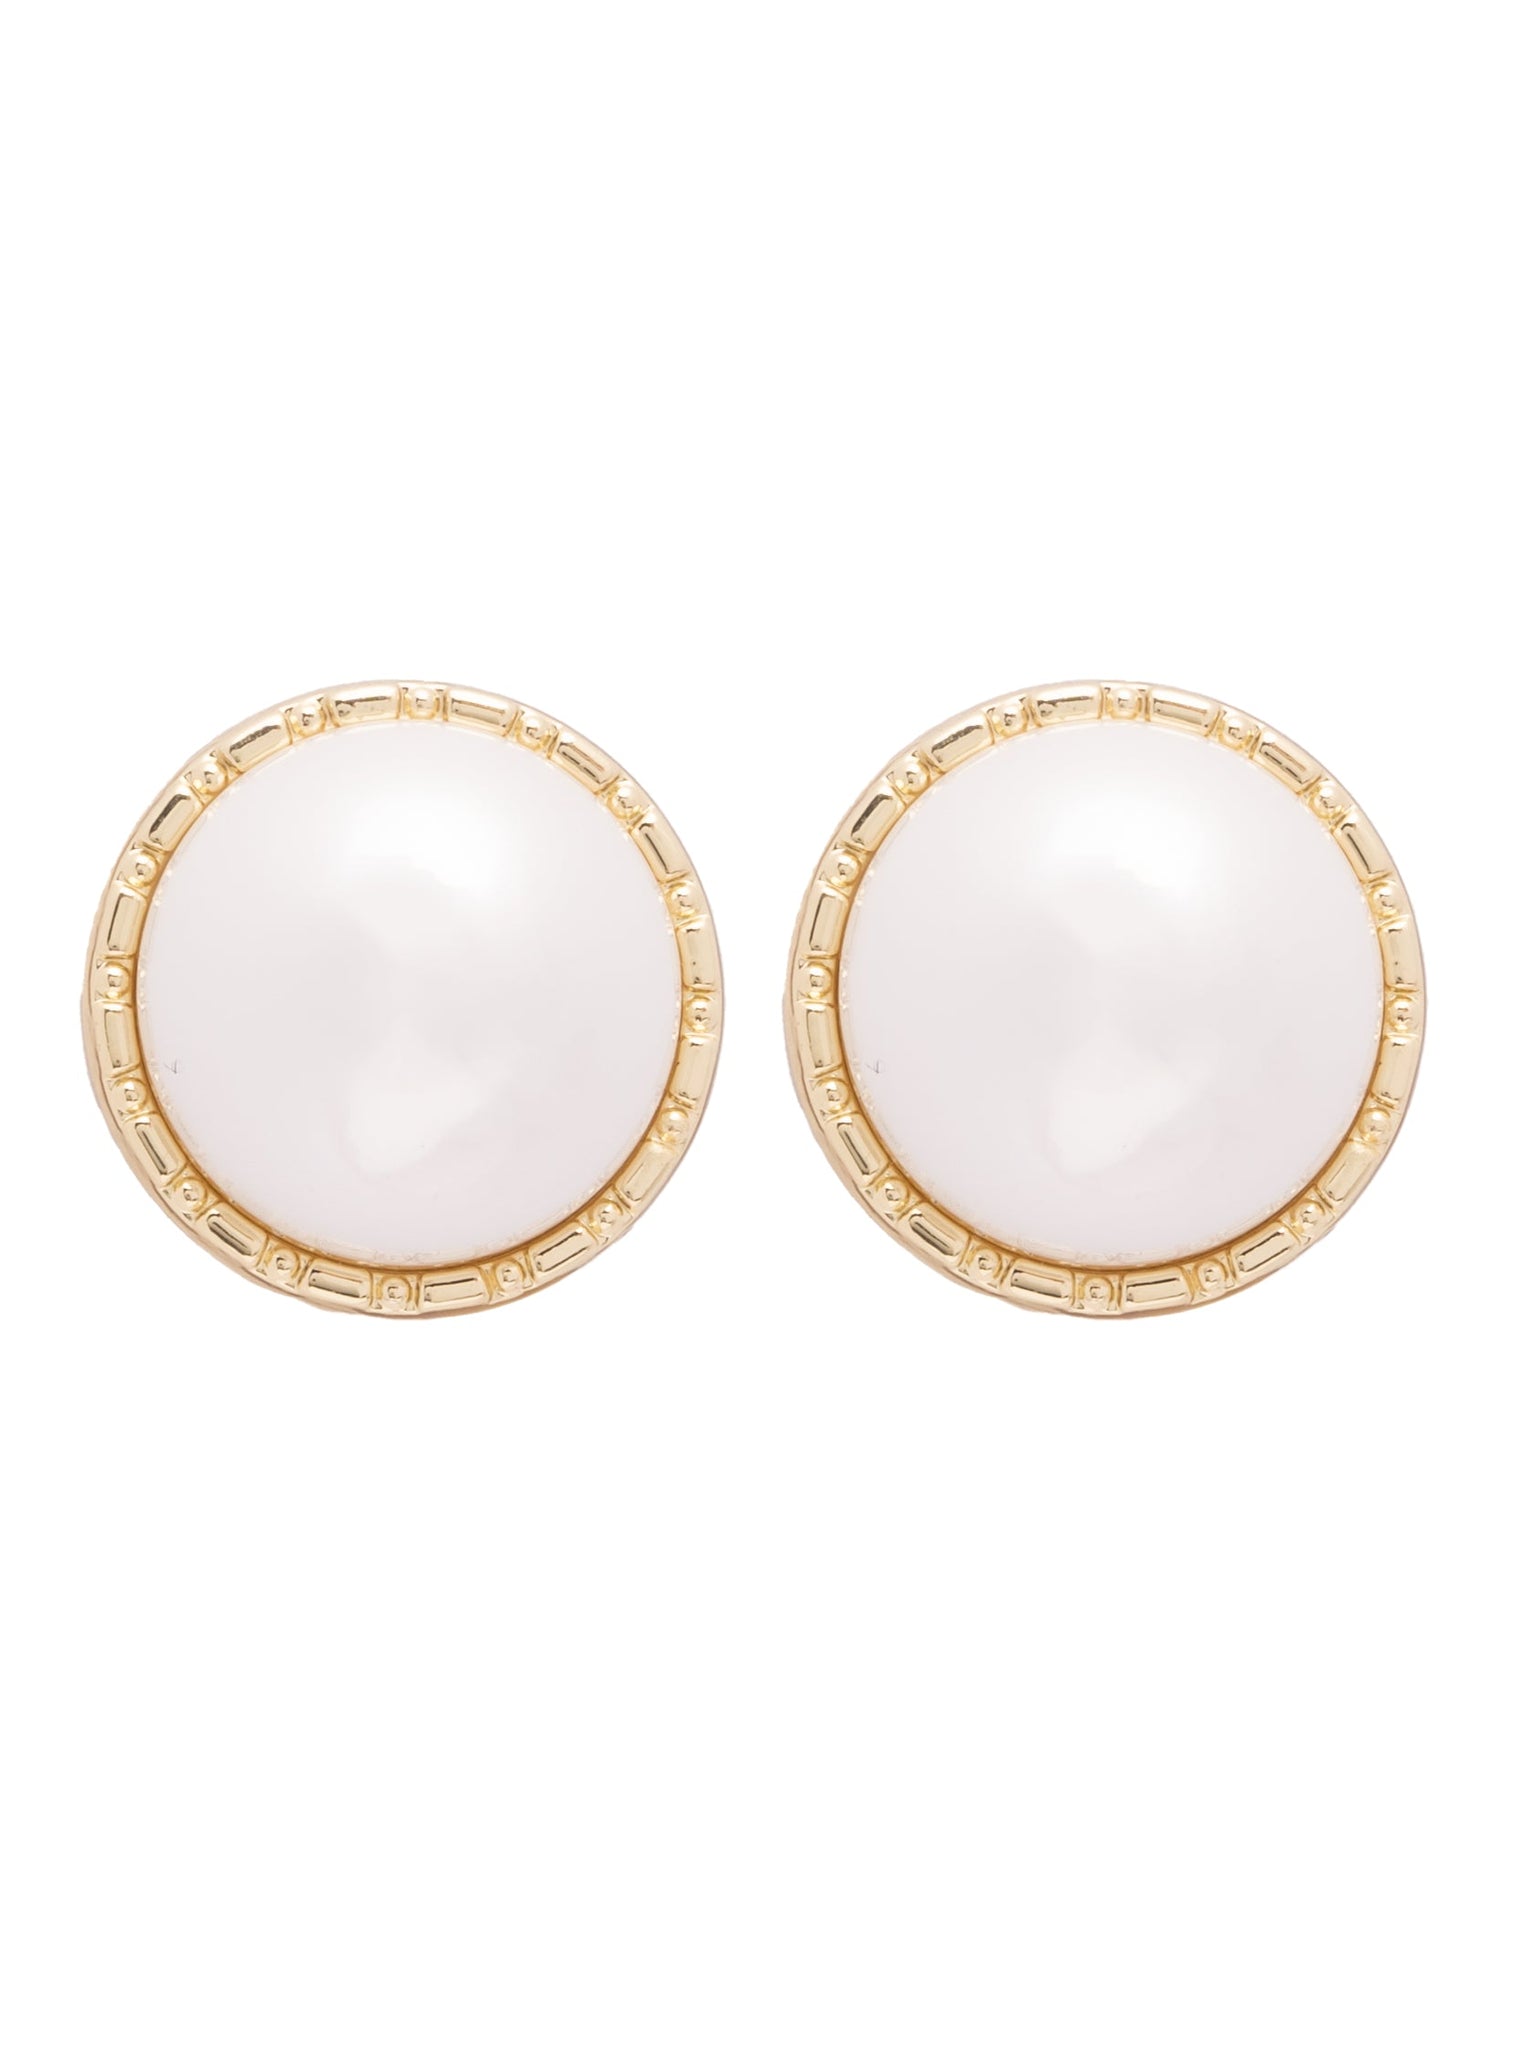 The Pearl Story - Cresent Pearl Stud Earrings 